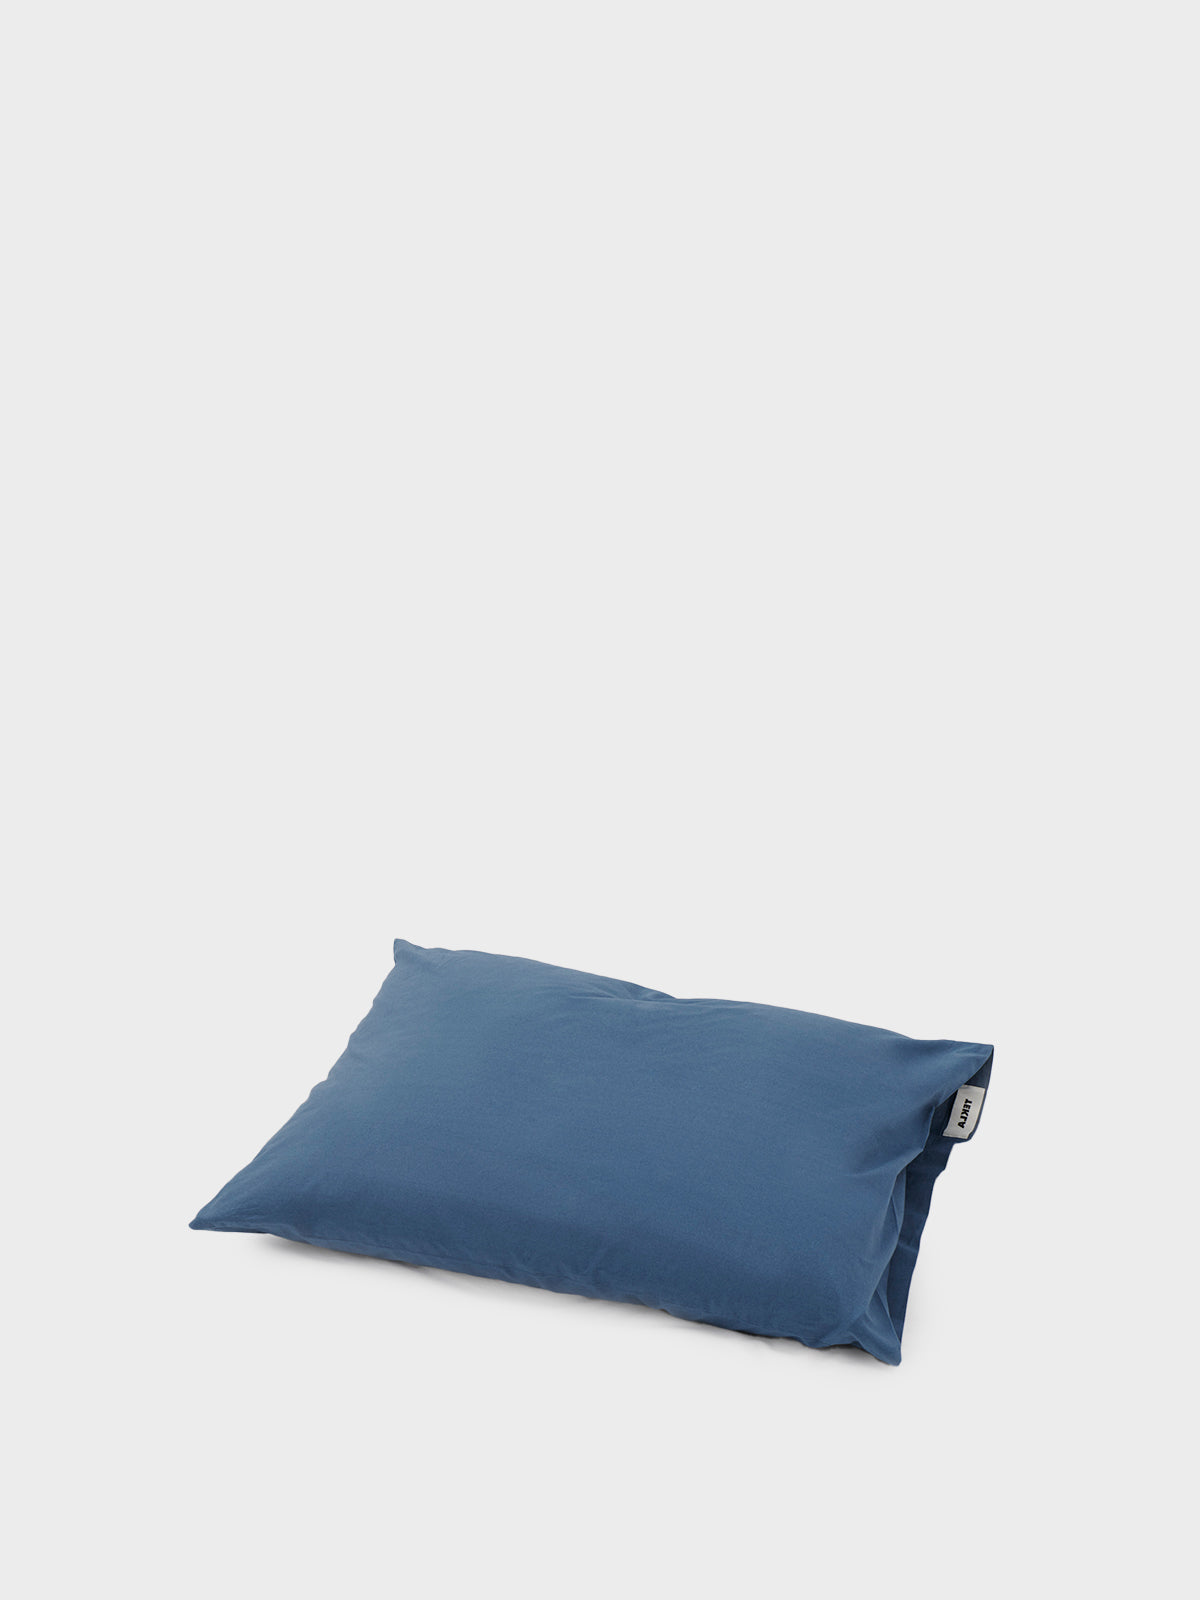 Tekla - Percale Pillow Sham in Midnight Blue